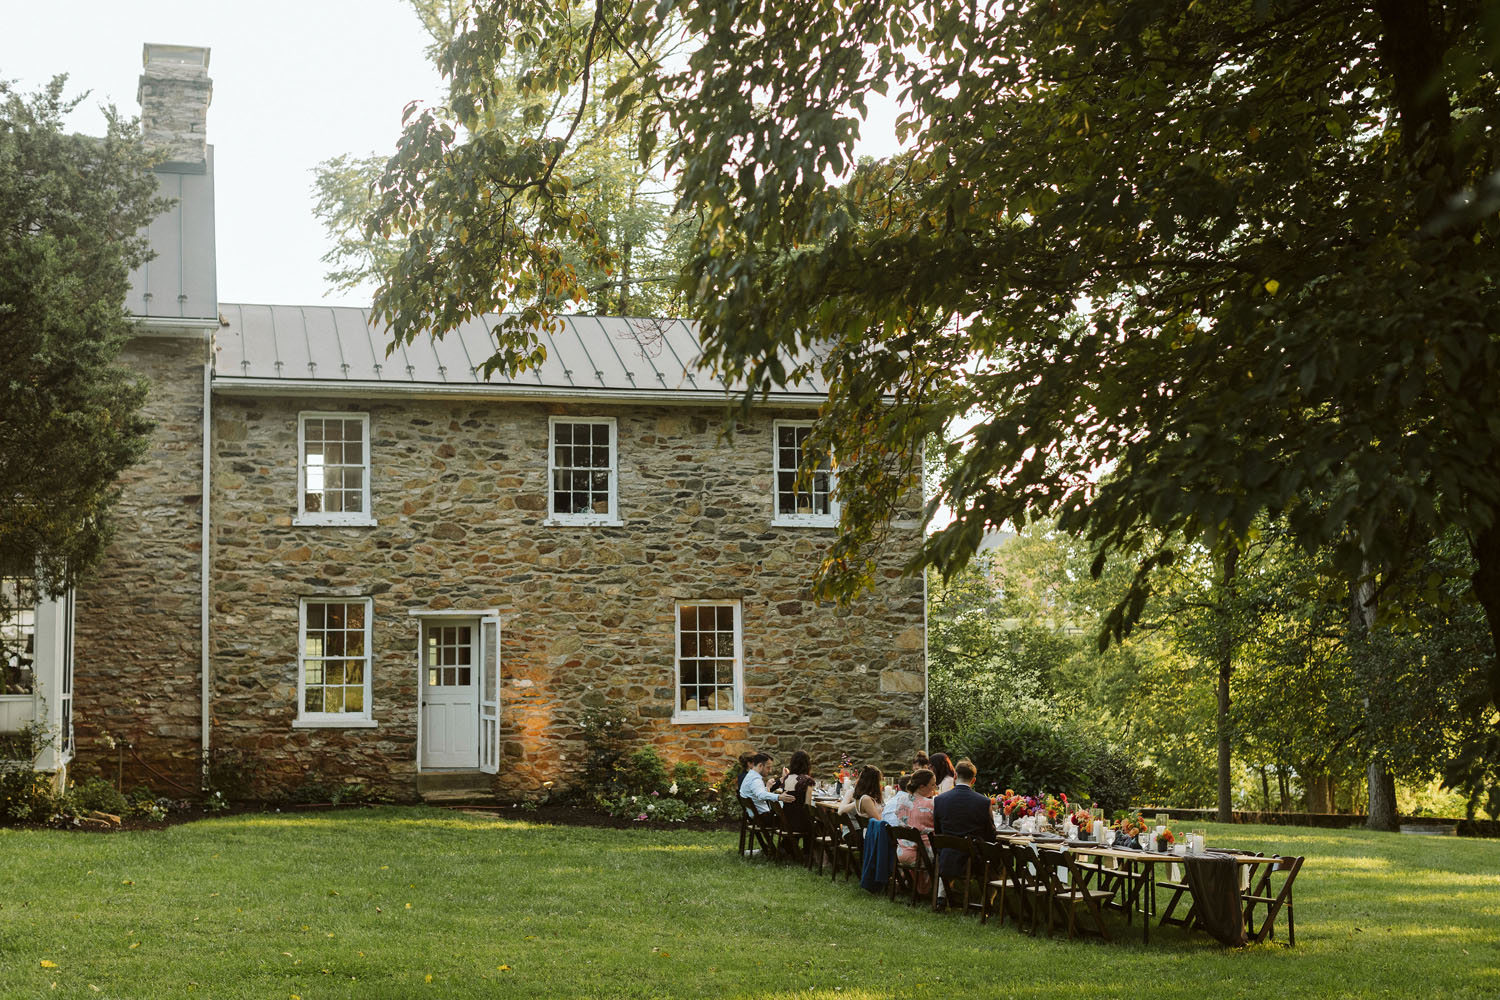 A two-story stone farmhouse with a chimney. A long table is set on the lawn near the shade of a tree